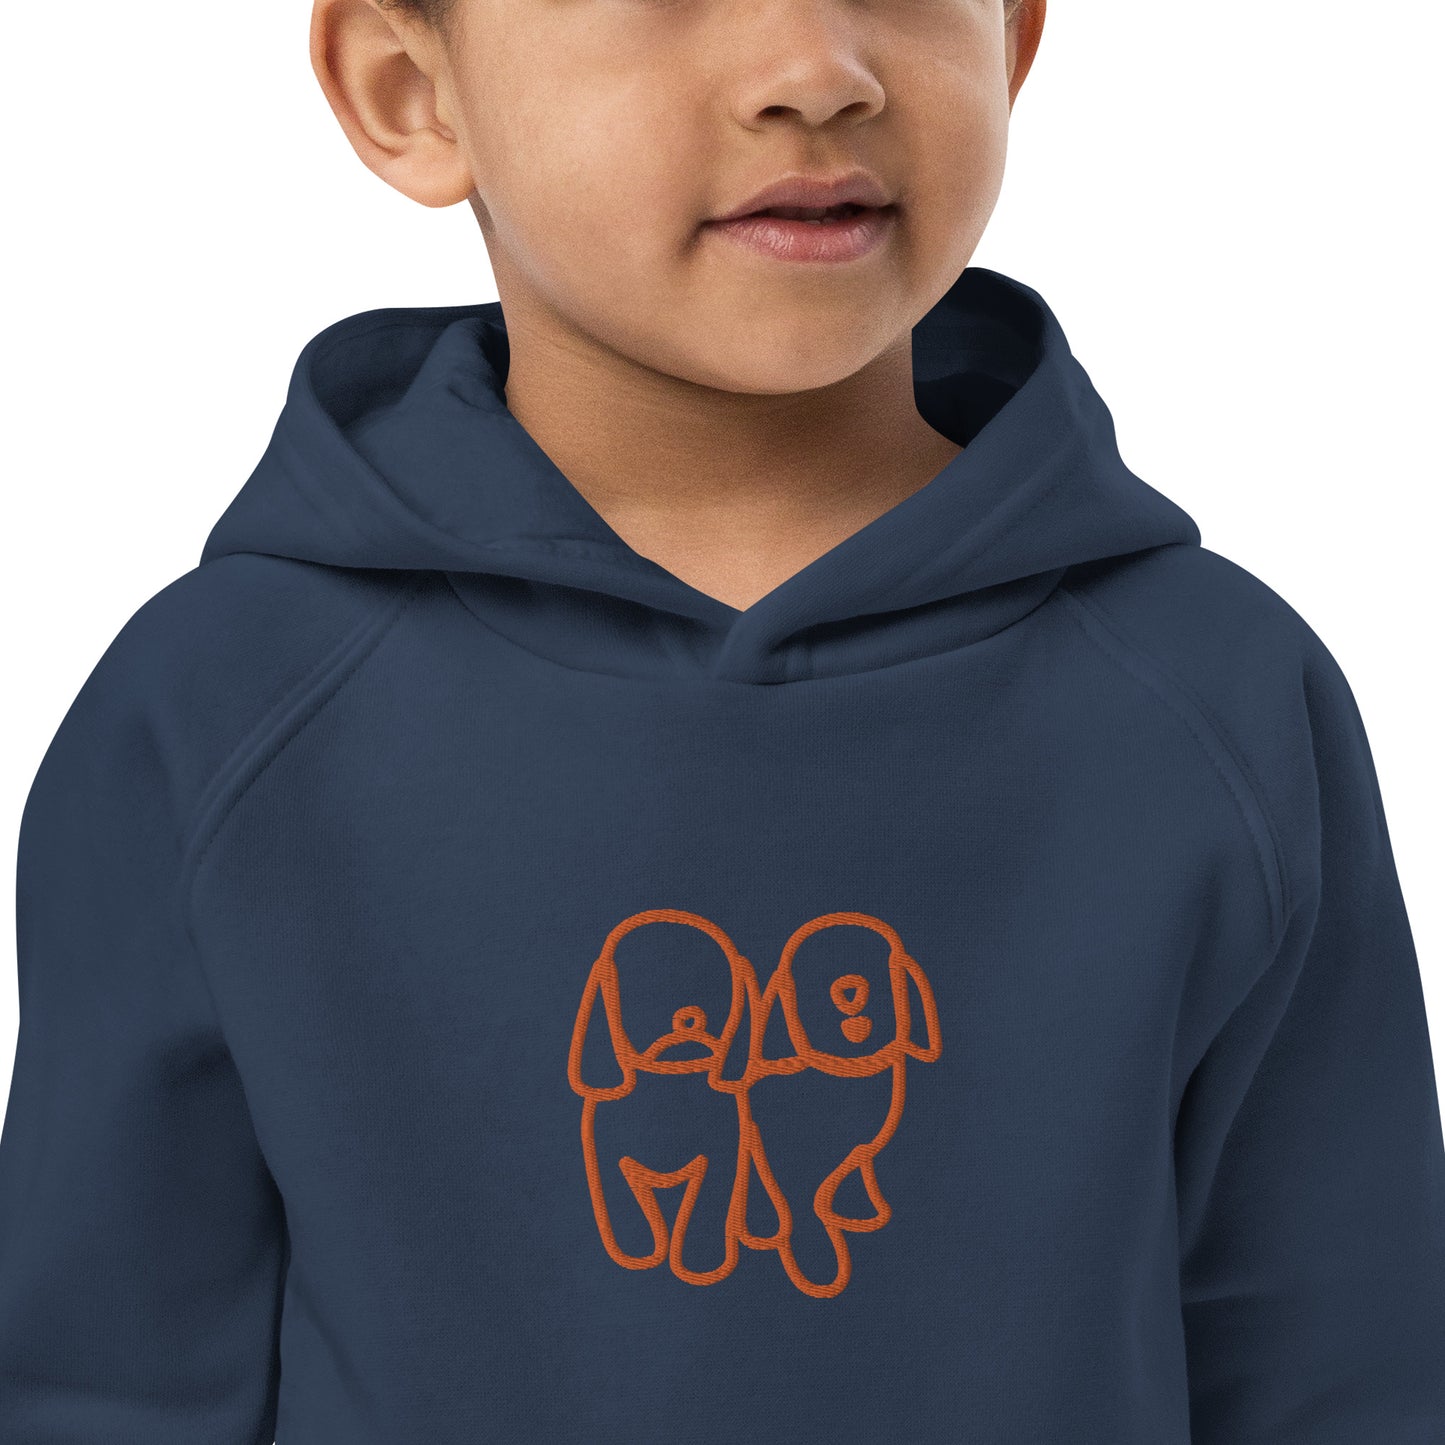 Kids unisex eco hoodie Nvy/Ong